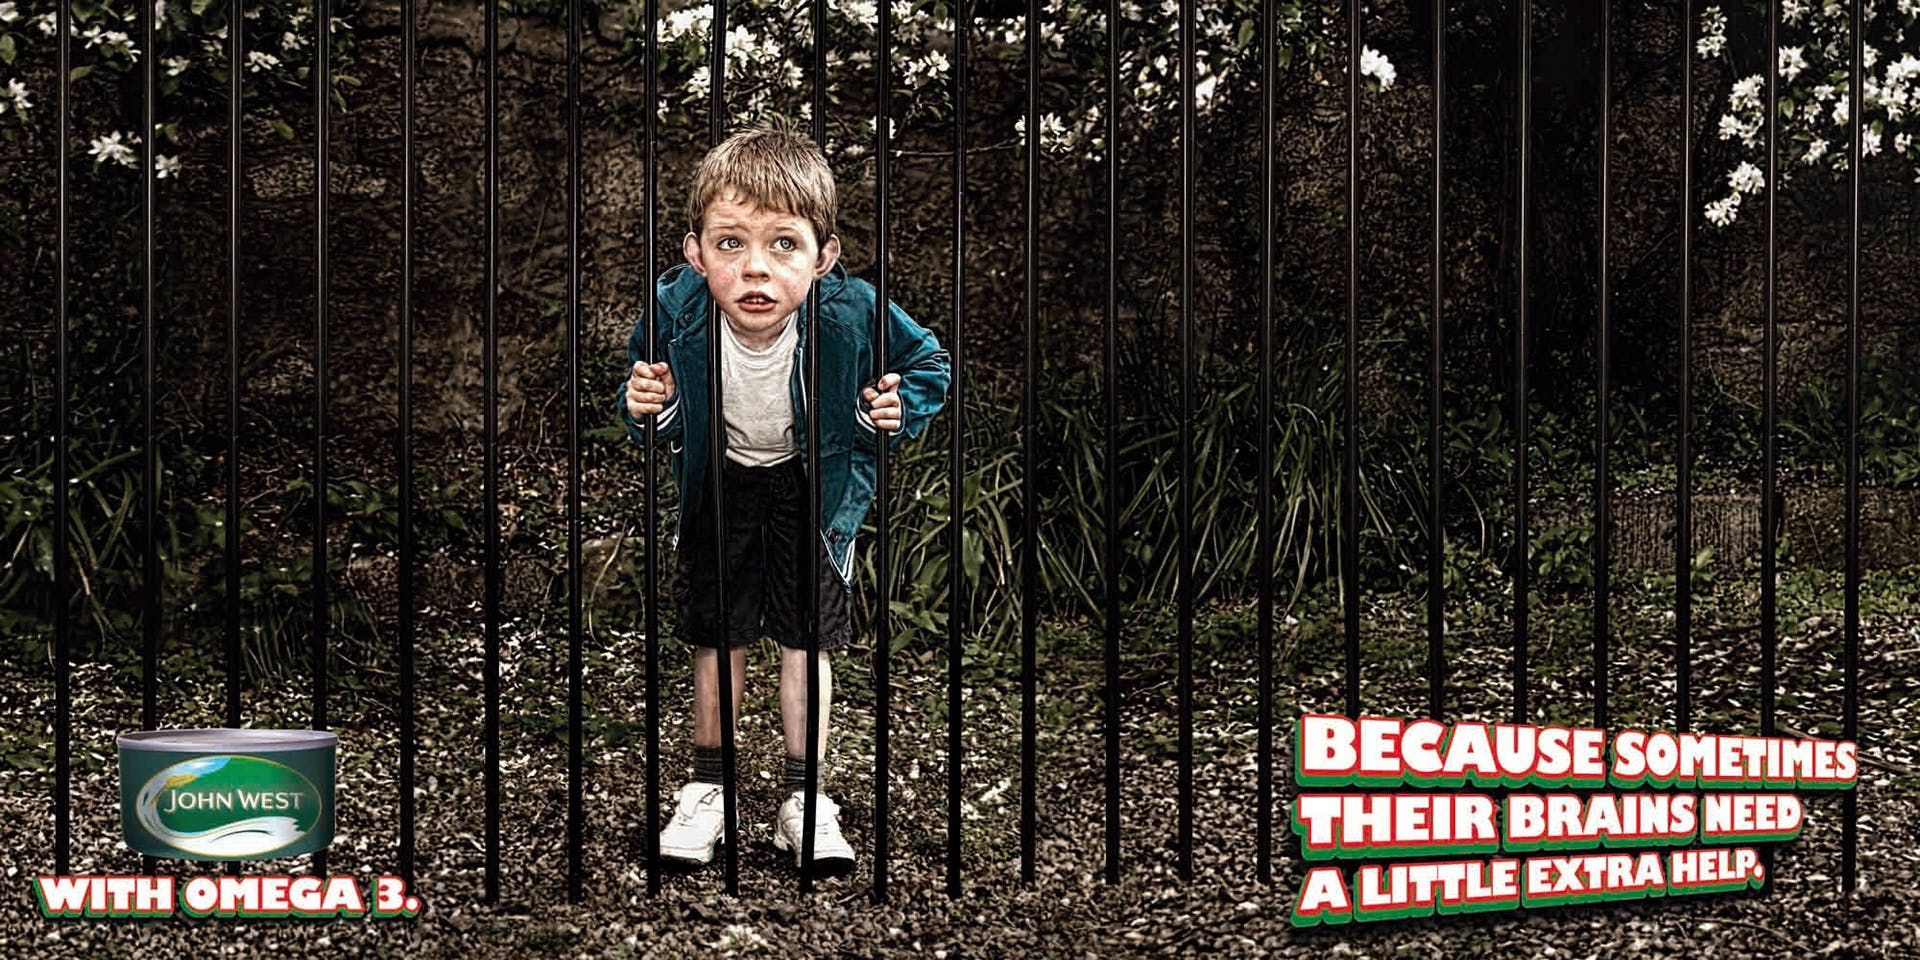 John West ad with child behind iron fence